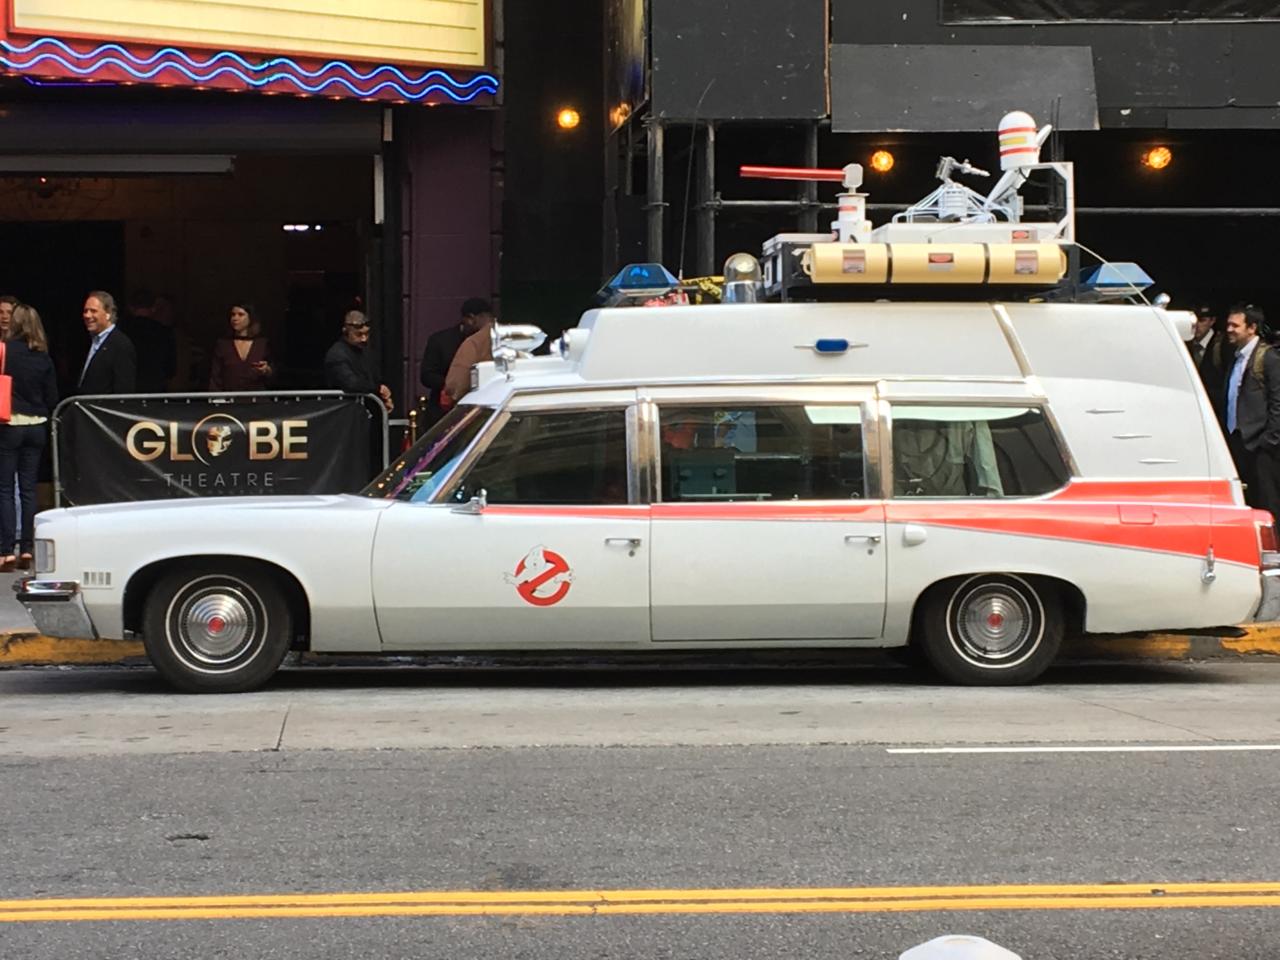 A hearse made into an Ecto-1... That's fitting.